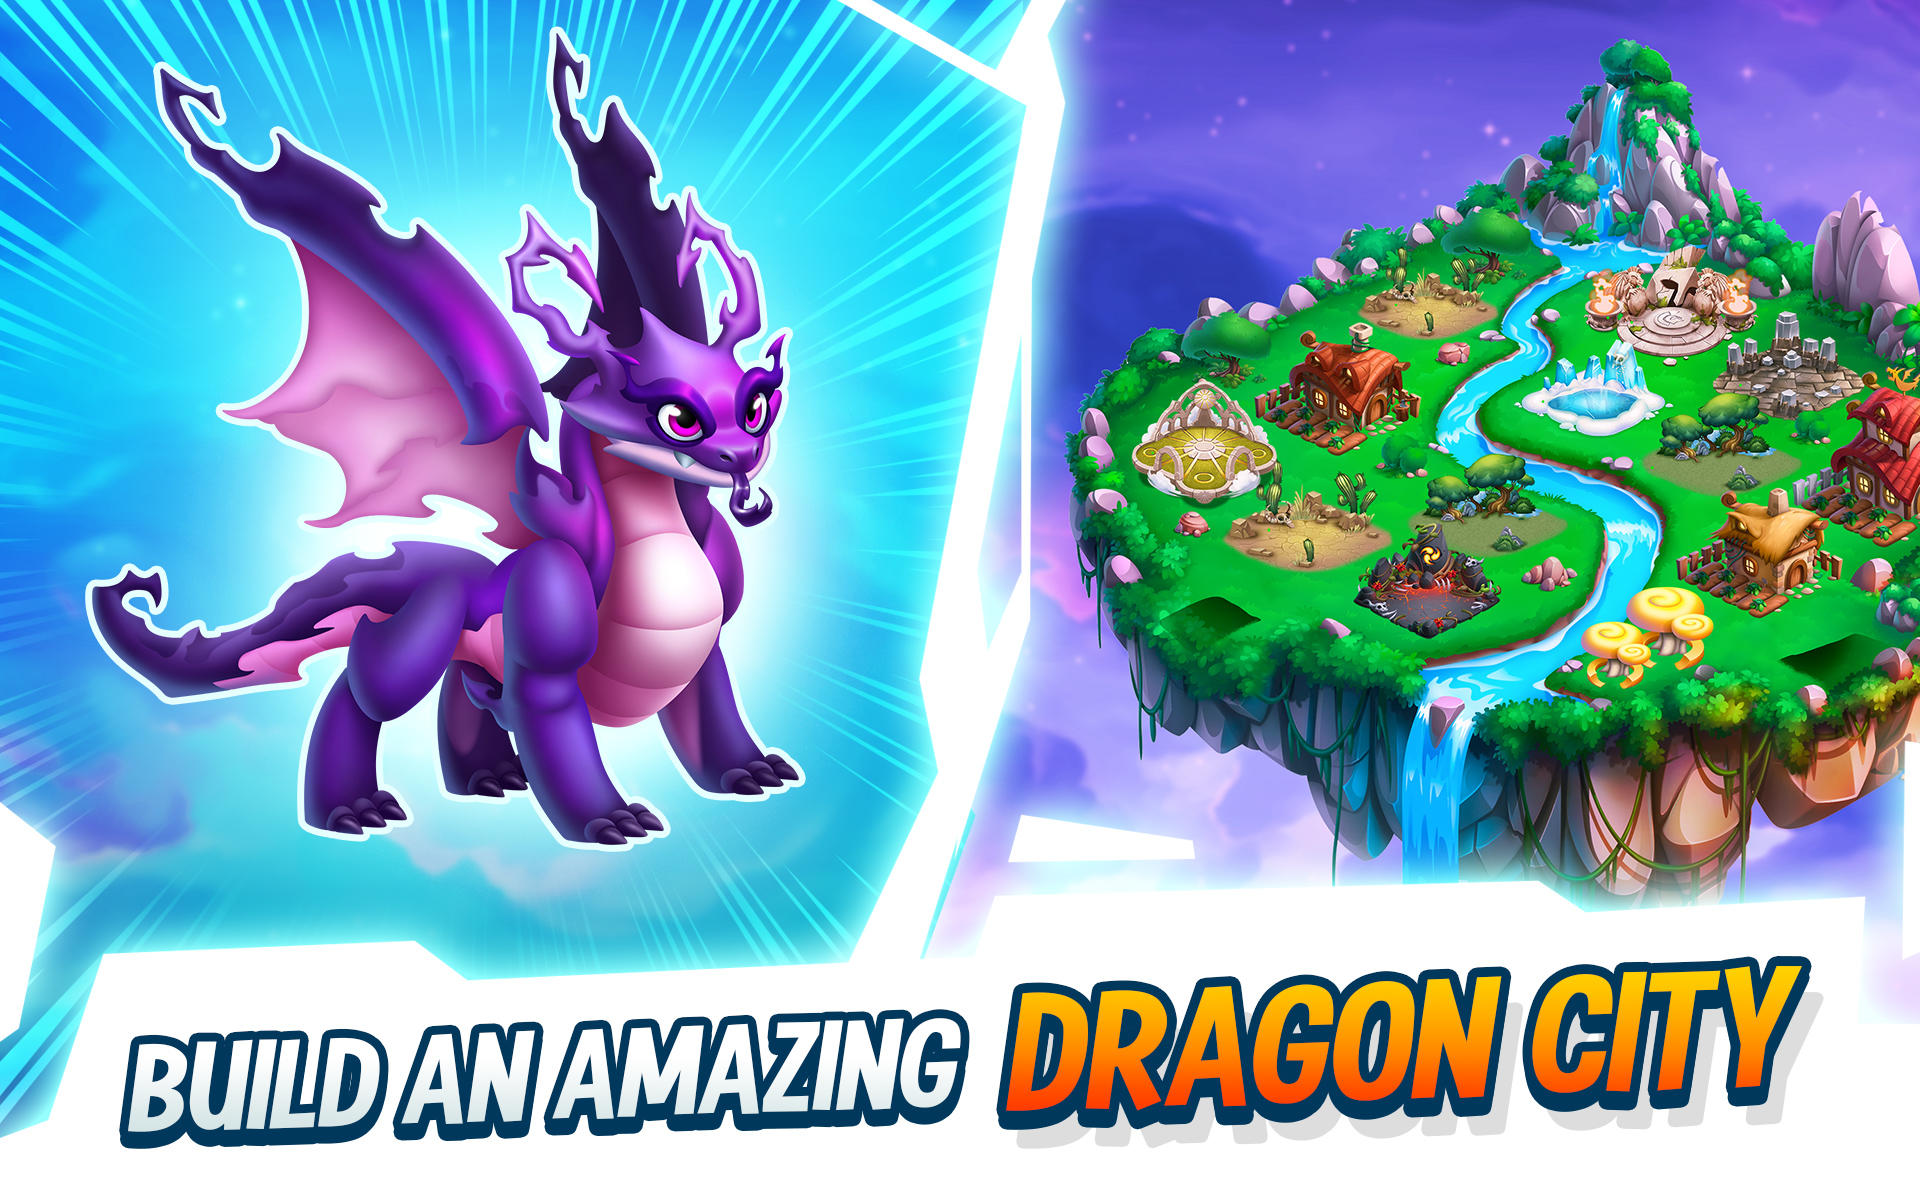 Dragon City: FREE Mythical Legendary Dragon! How To Get The